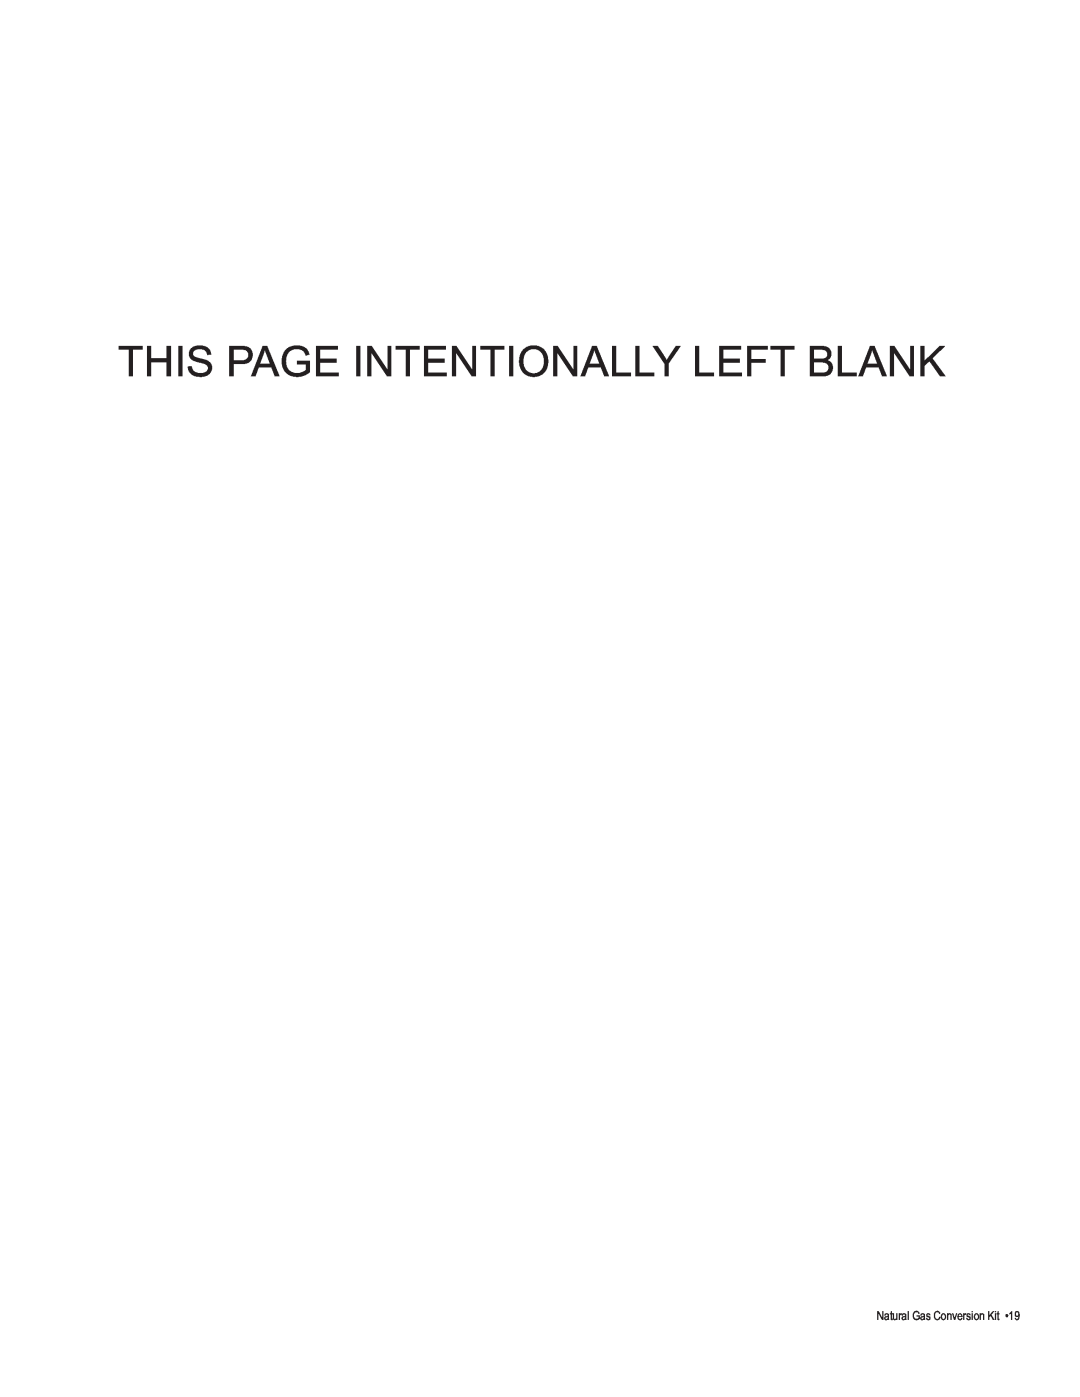 Char-Broil 4984619 manual This Page Intentionally Left Blank, Natural Gas Conversion Kit 